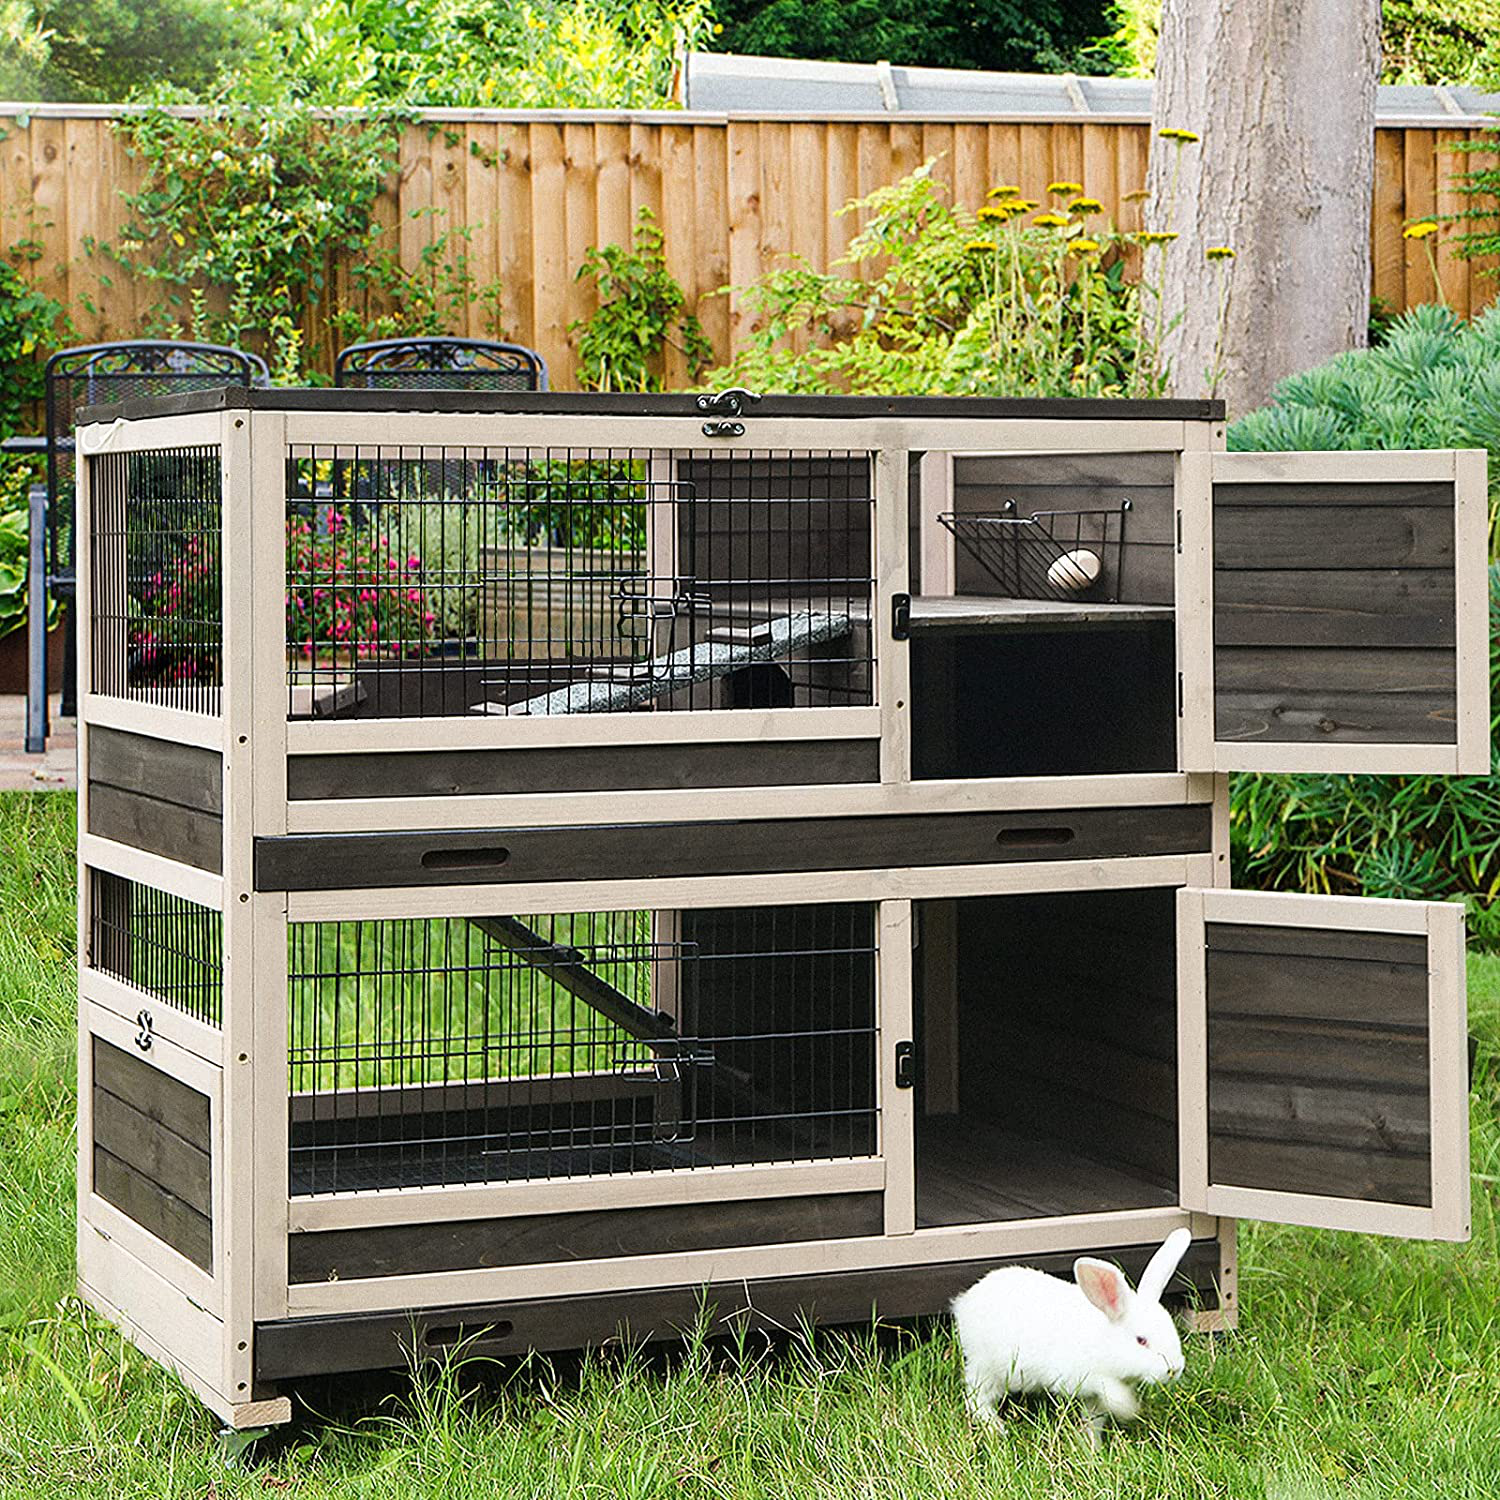 Rabbit Hutch Indoor Pet House for Small Animals, Outdoor Bunny Cage Wooden Bunny Hutch -Two Deeper Trays & Four Casters Included